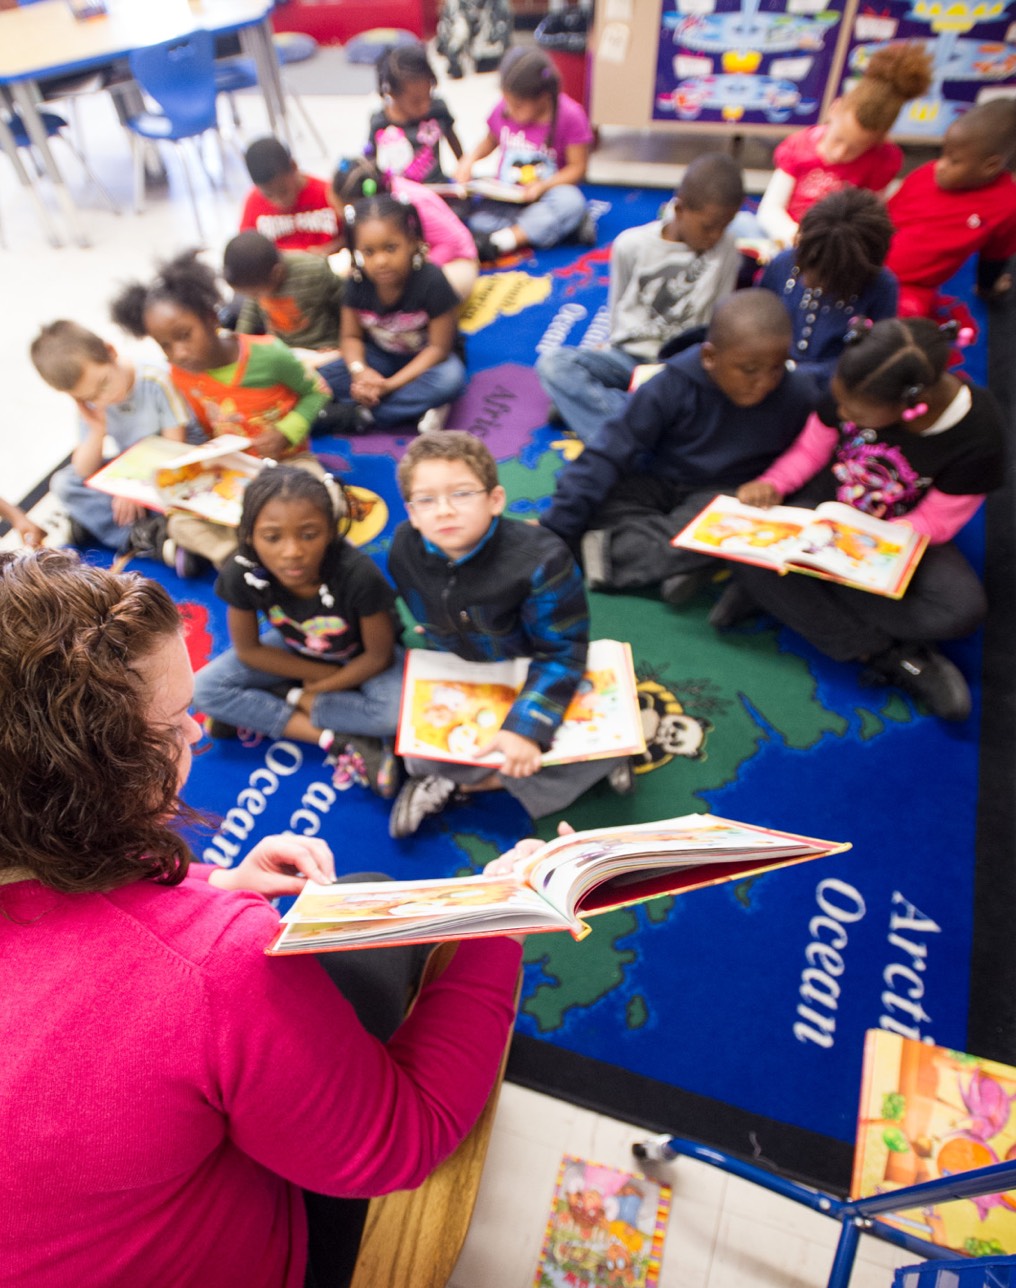 Children reading together in classroom